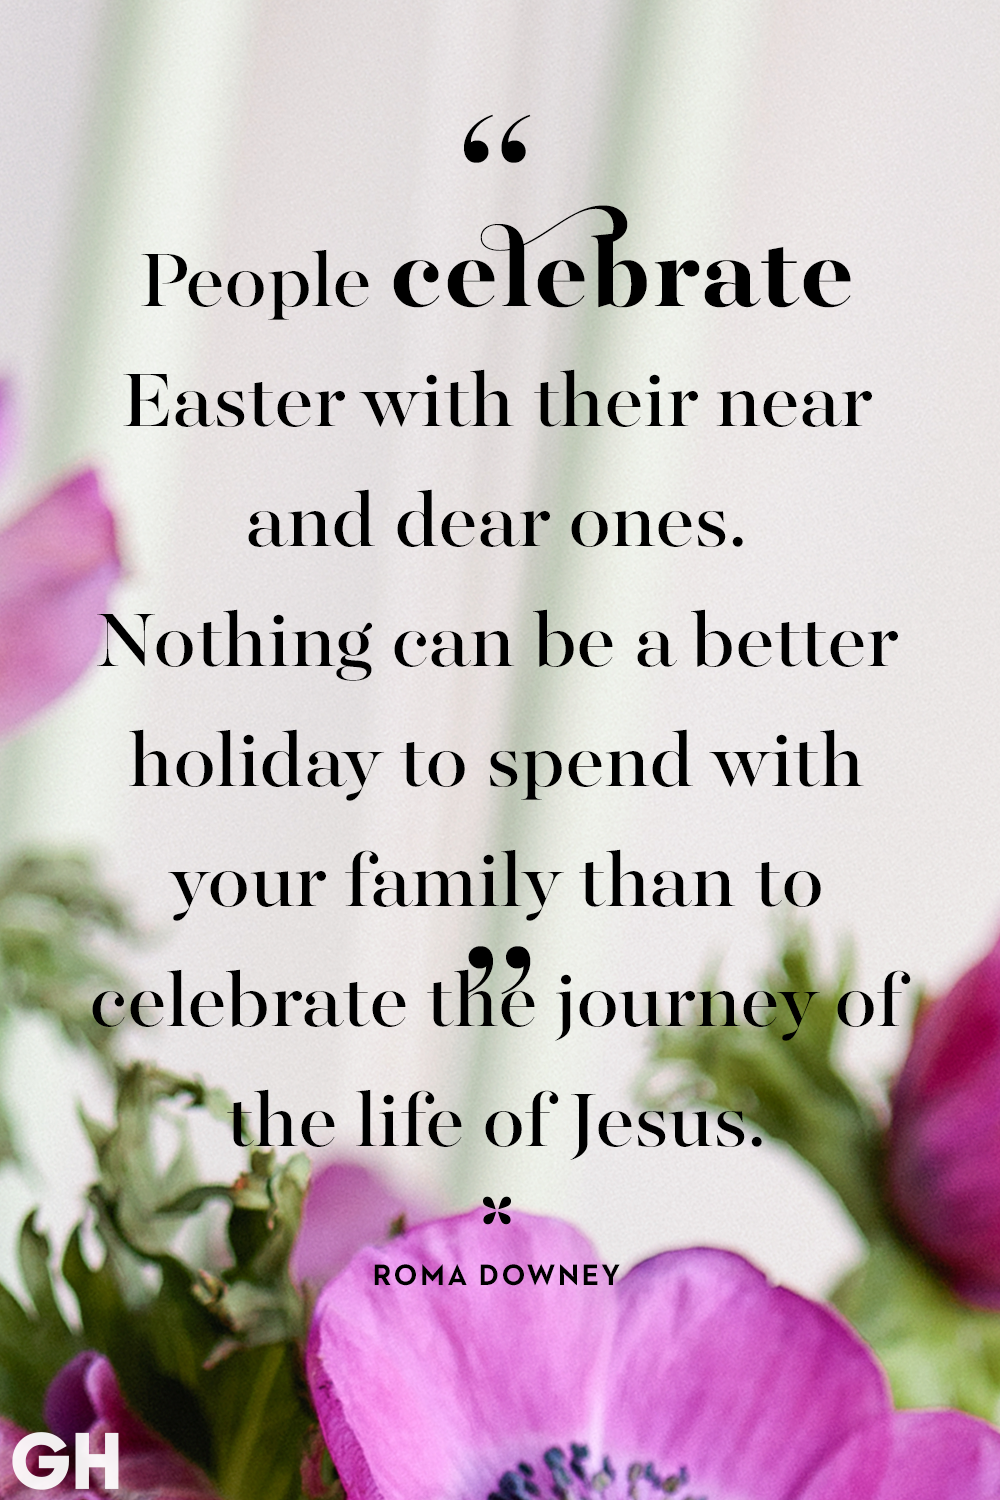 50 Best Easter Quotes 2023 - Inspirational Easter Sayings 2023